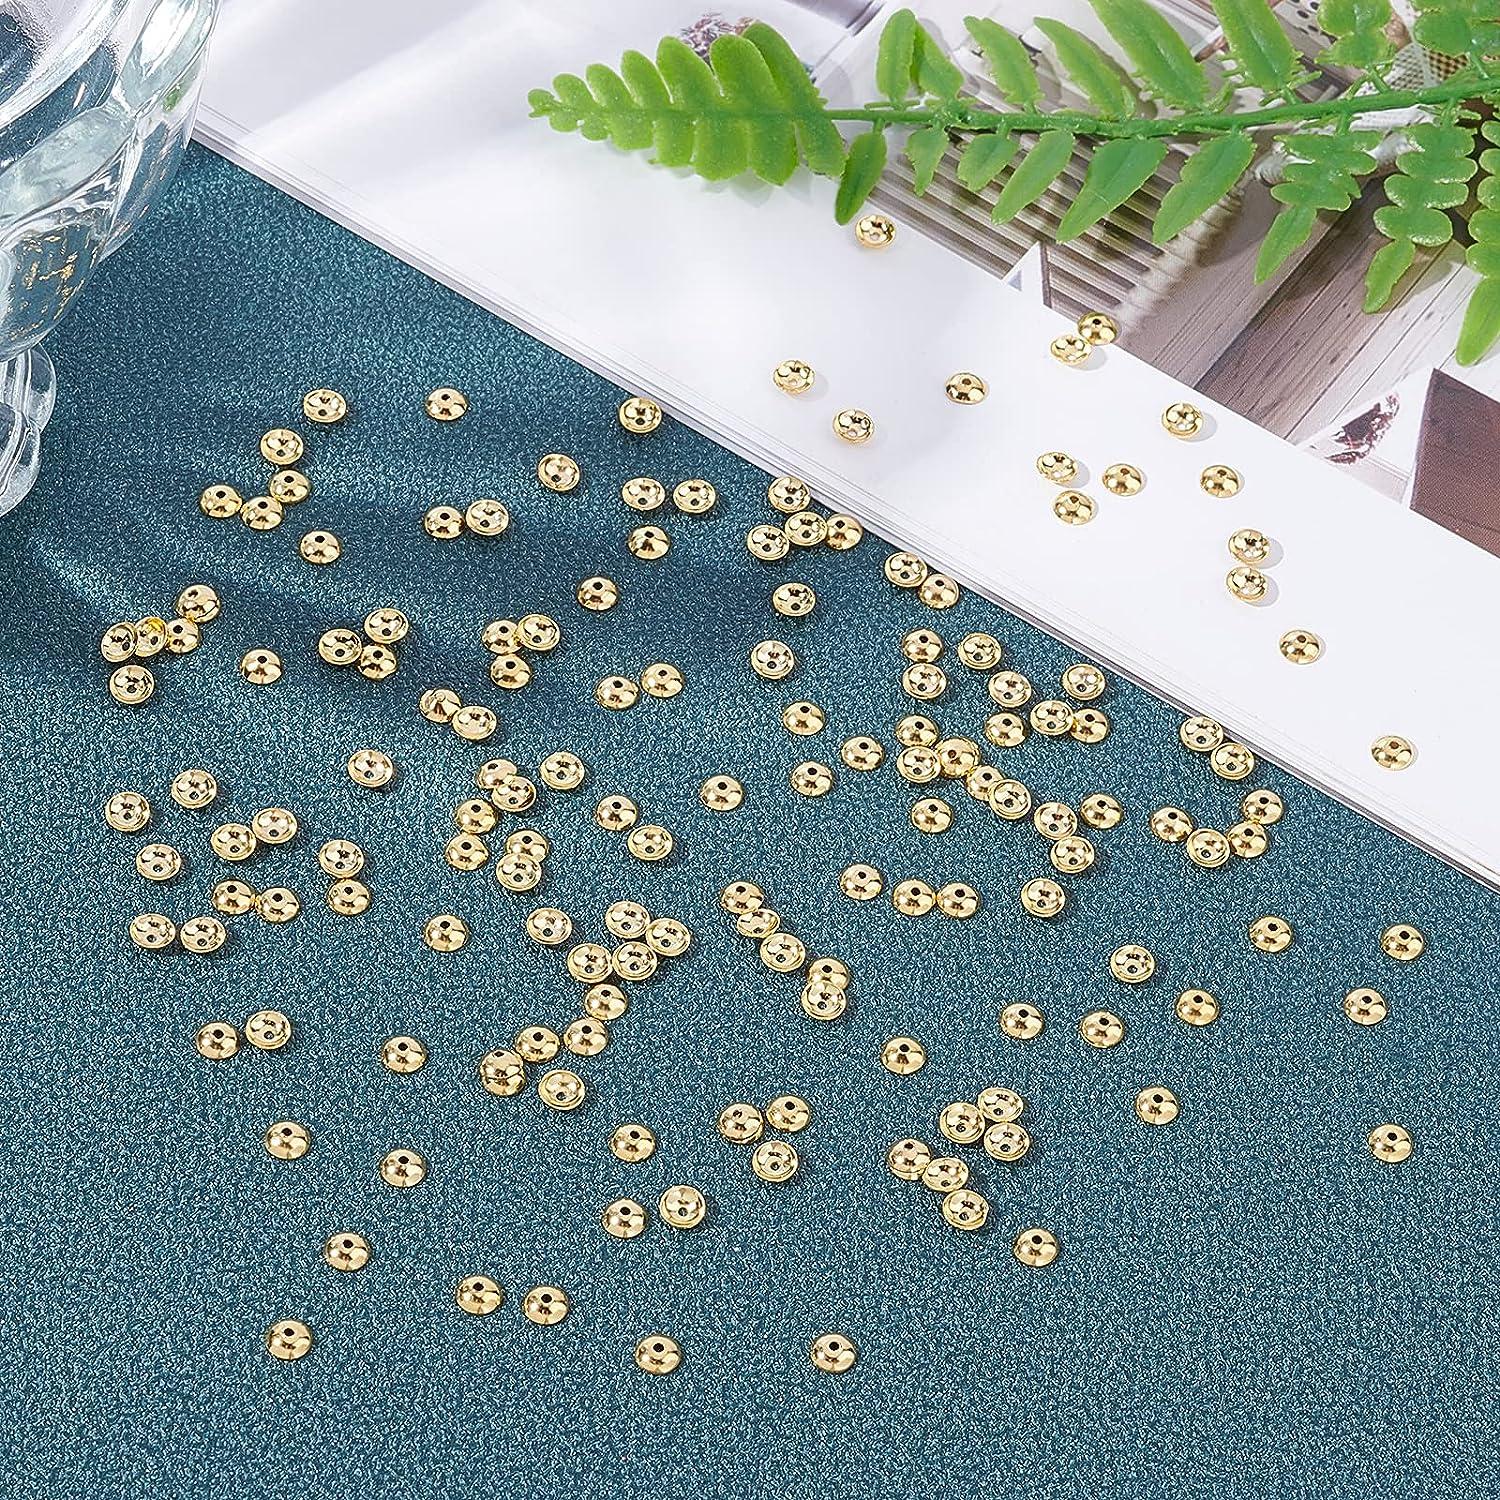 UNICRAFTALE About 150pcs Apetalous Flower Bead Caps, 4mm Stainless Steel  Spacer Caps, Golden Bead Cap Spacers for Bracelet Necklace Jewelry Making